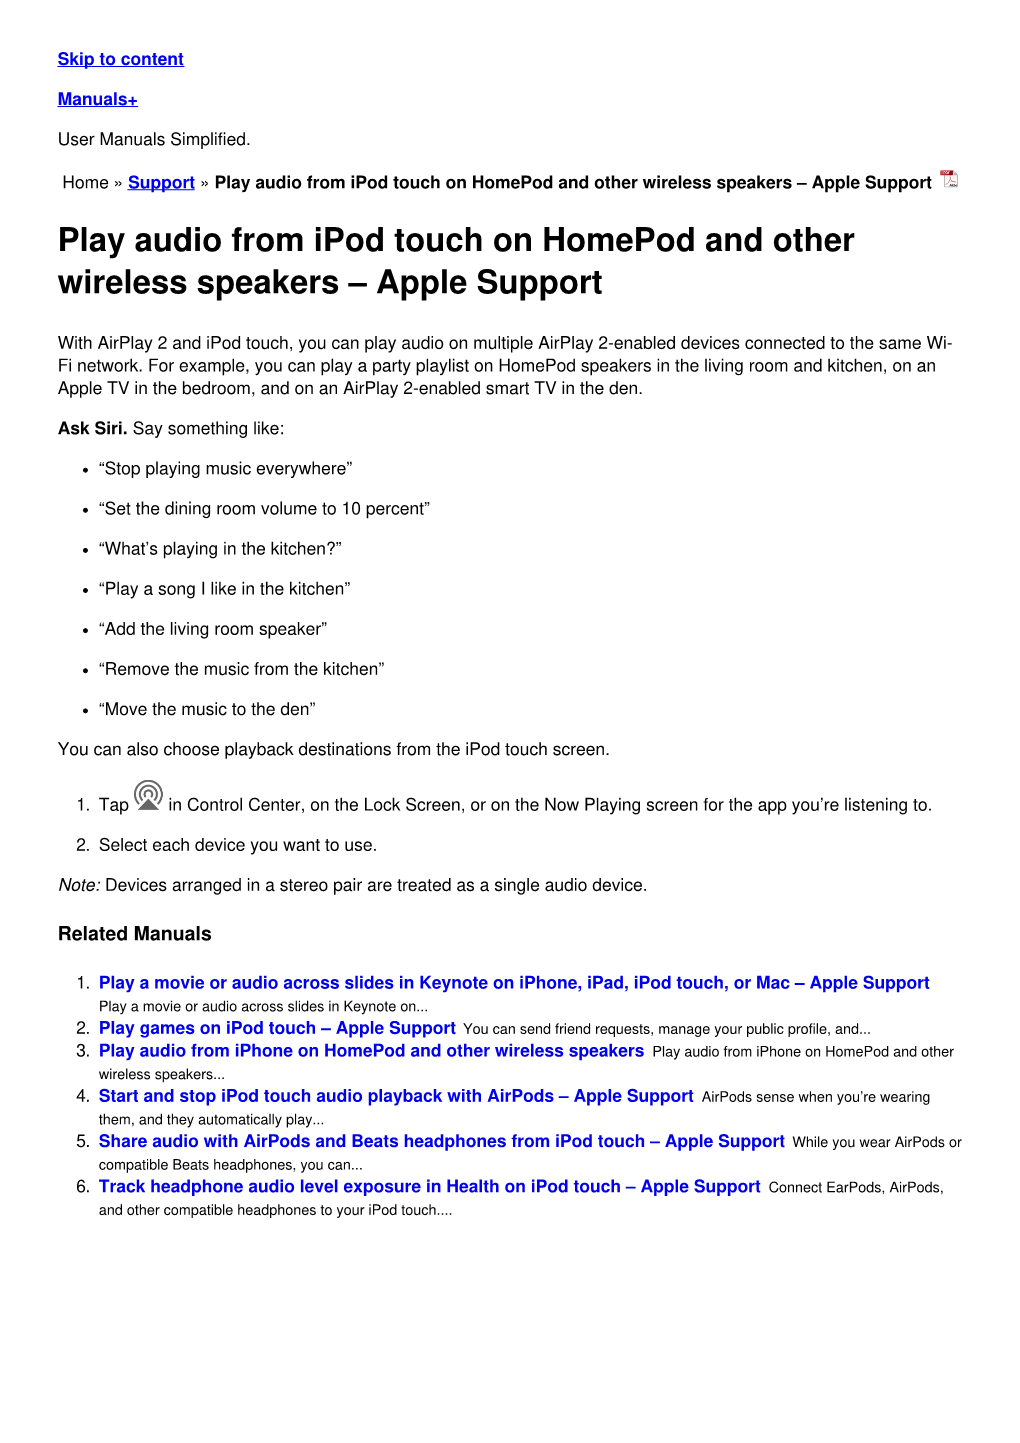 Play Audio from Ipod Touch on Homepod and Other Wireless Speakers – Apple Support